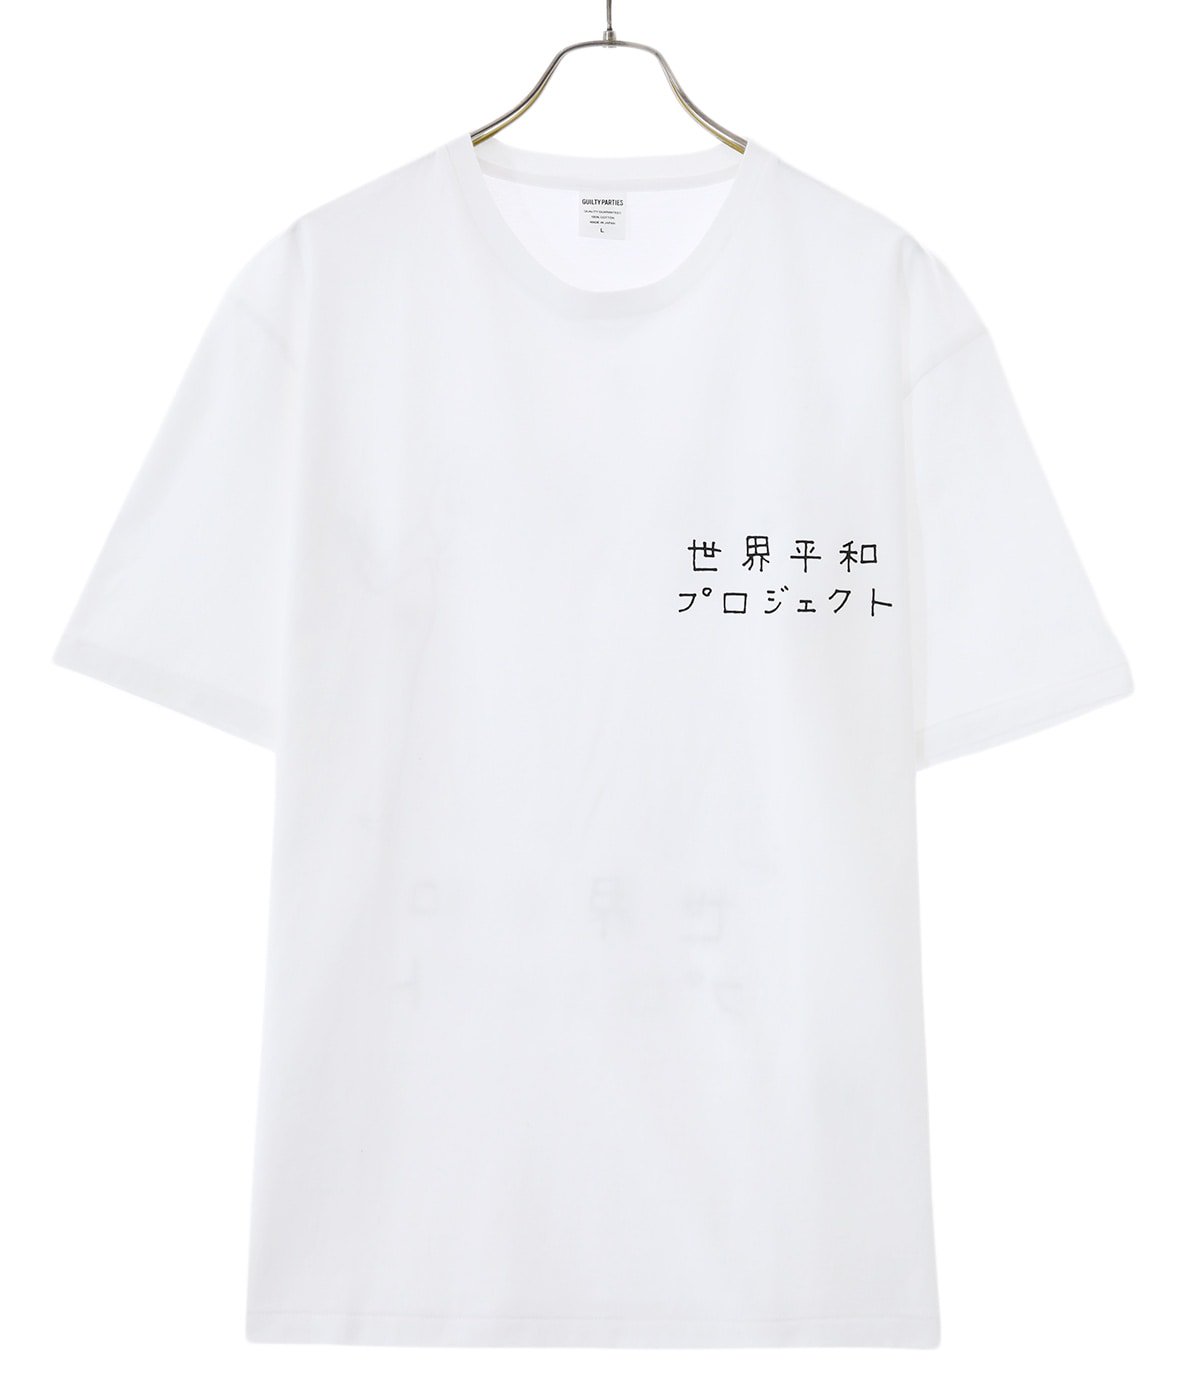 WASHED HEAVY WEIGHT CREW NECK COLOR T-SHIRT ( TYPE-3 )